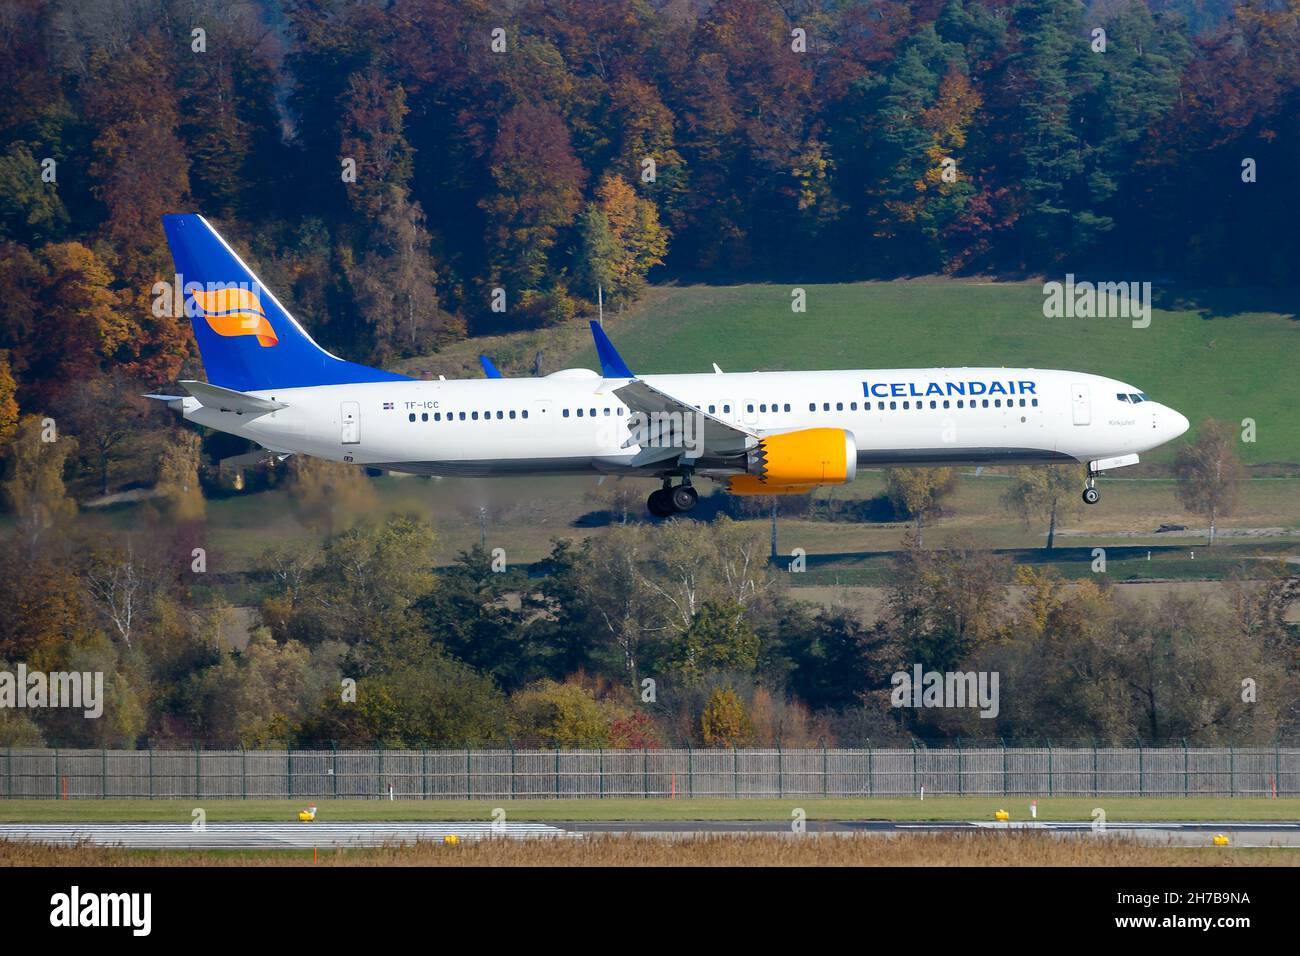 Icelandair Boeing 737 Max aircraft landing at Zurich Airport inbound from Keflavik, Iceland.  Airplane TF-ICC 737 MAX of Iceland Air landing. Stock Photo